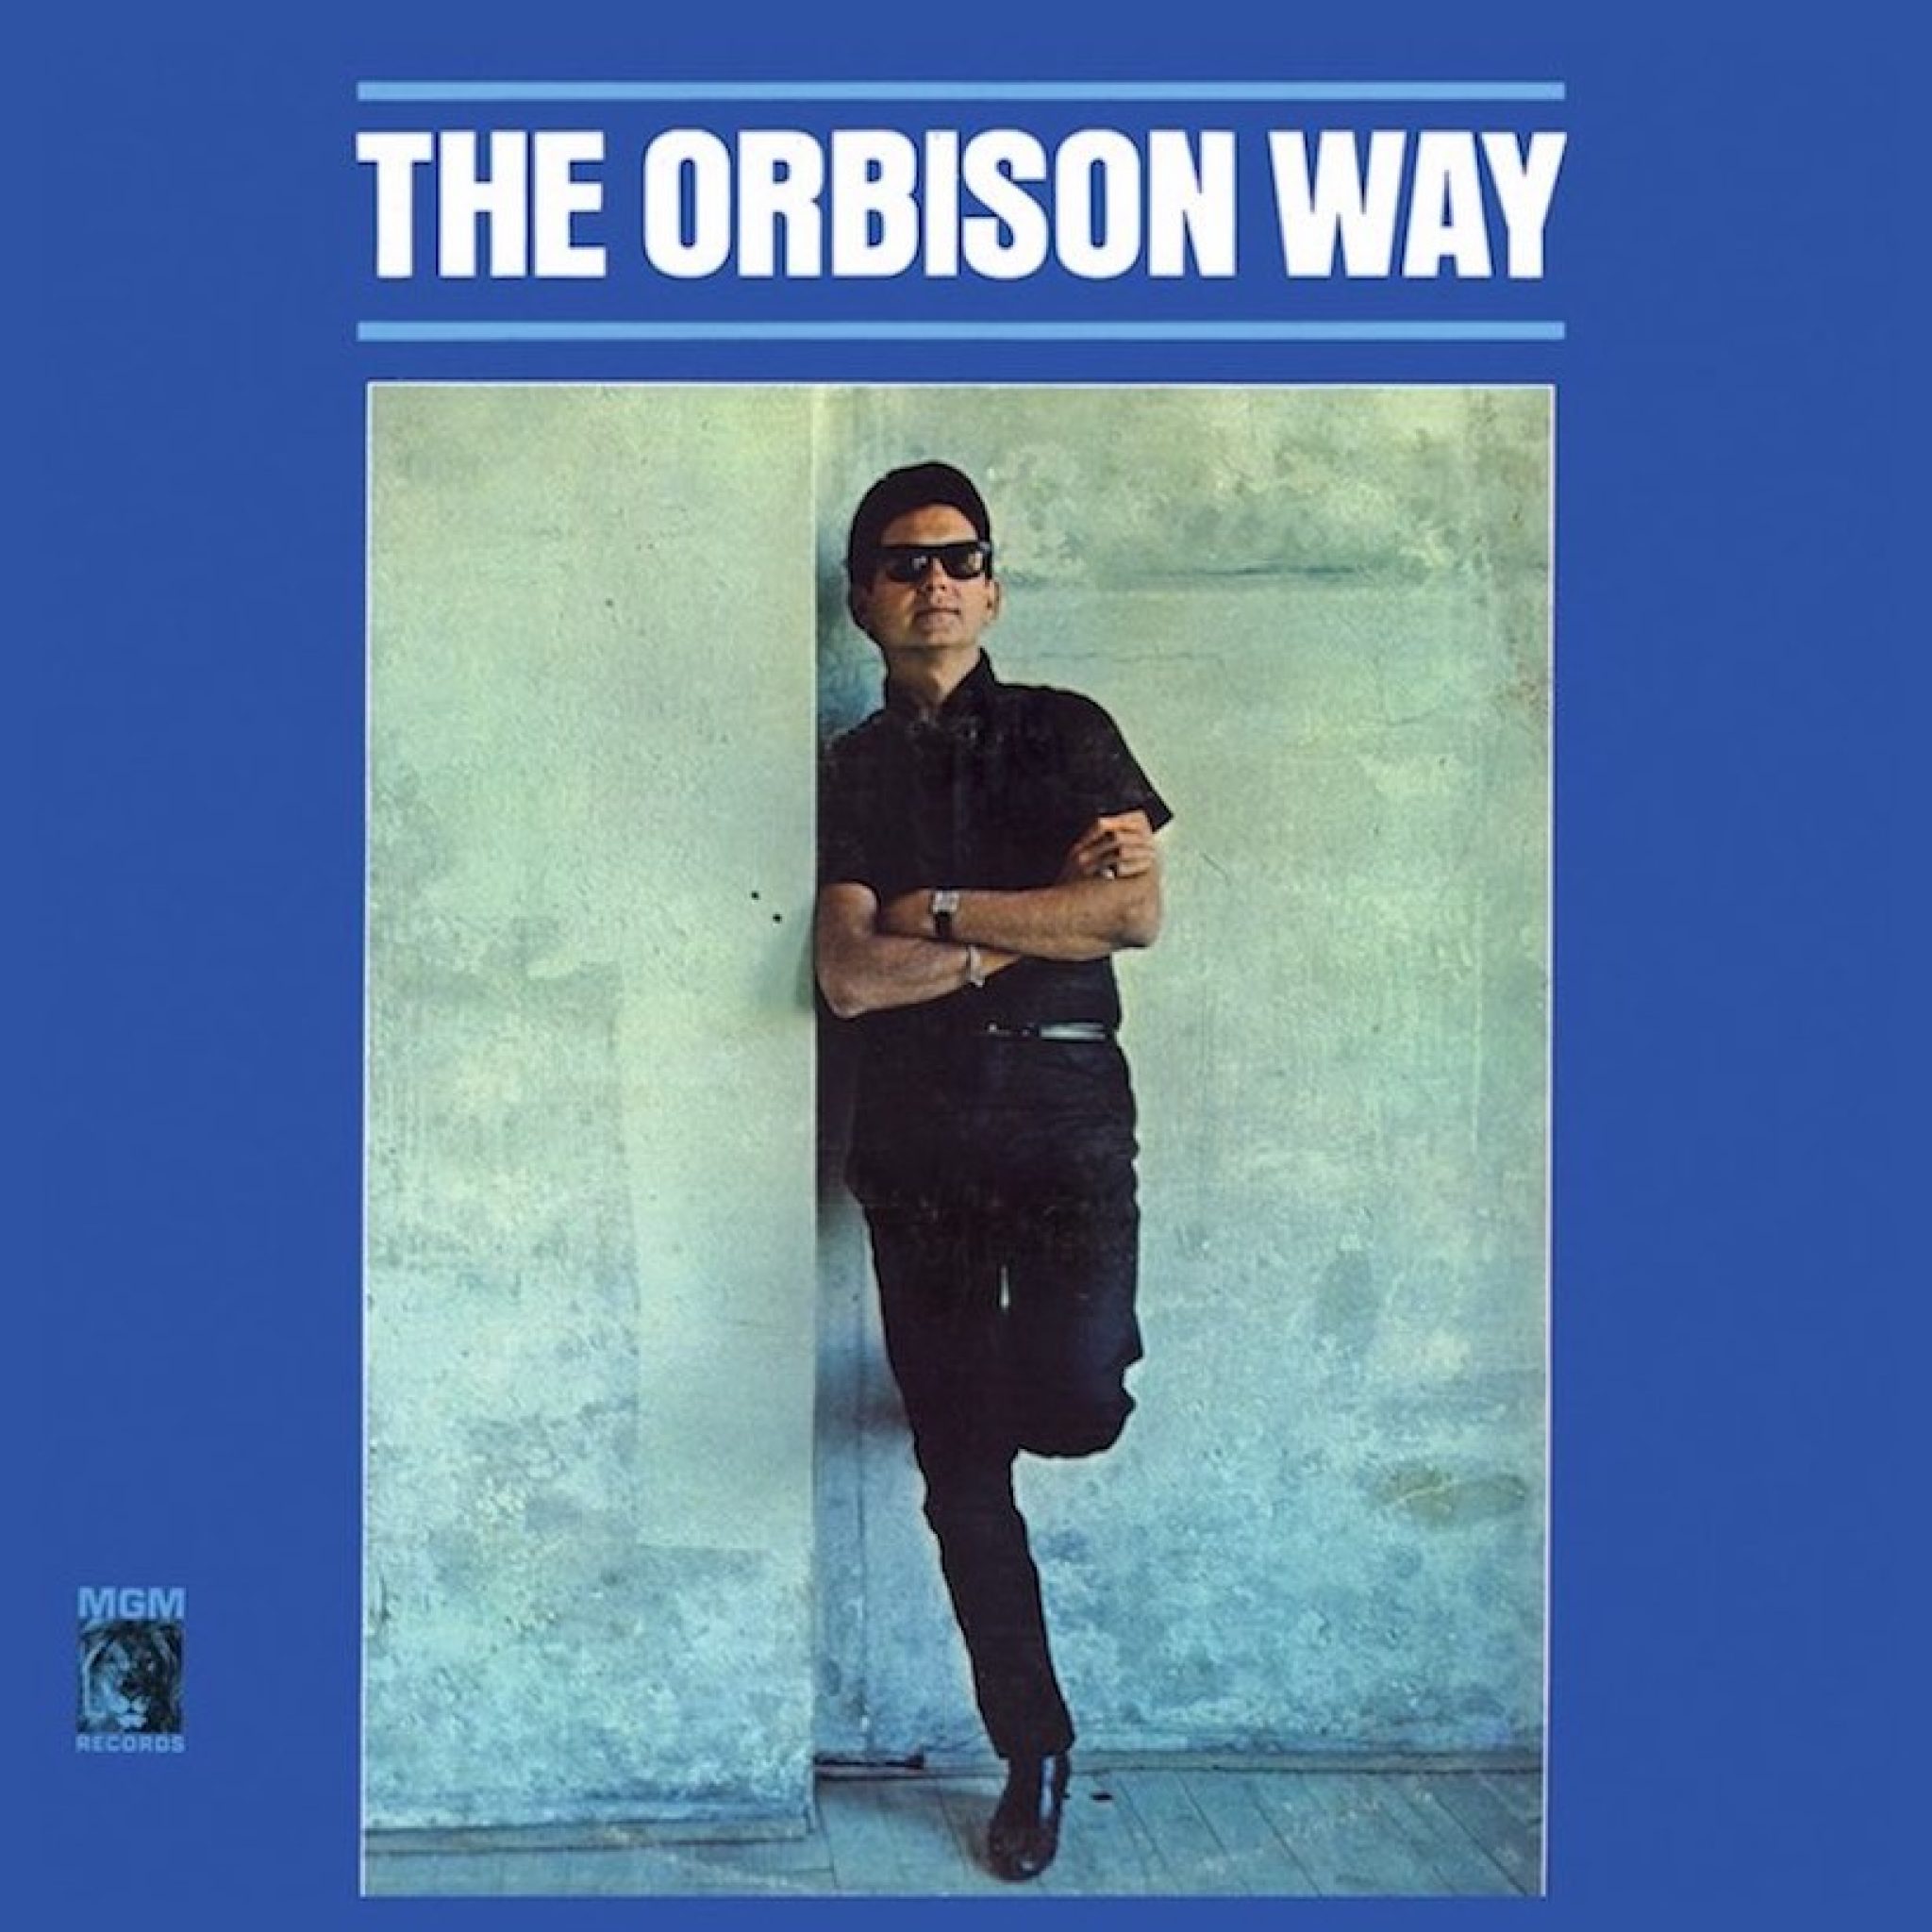 did roy orbison sing wicked game